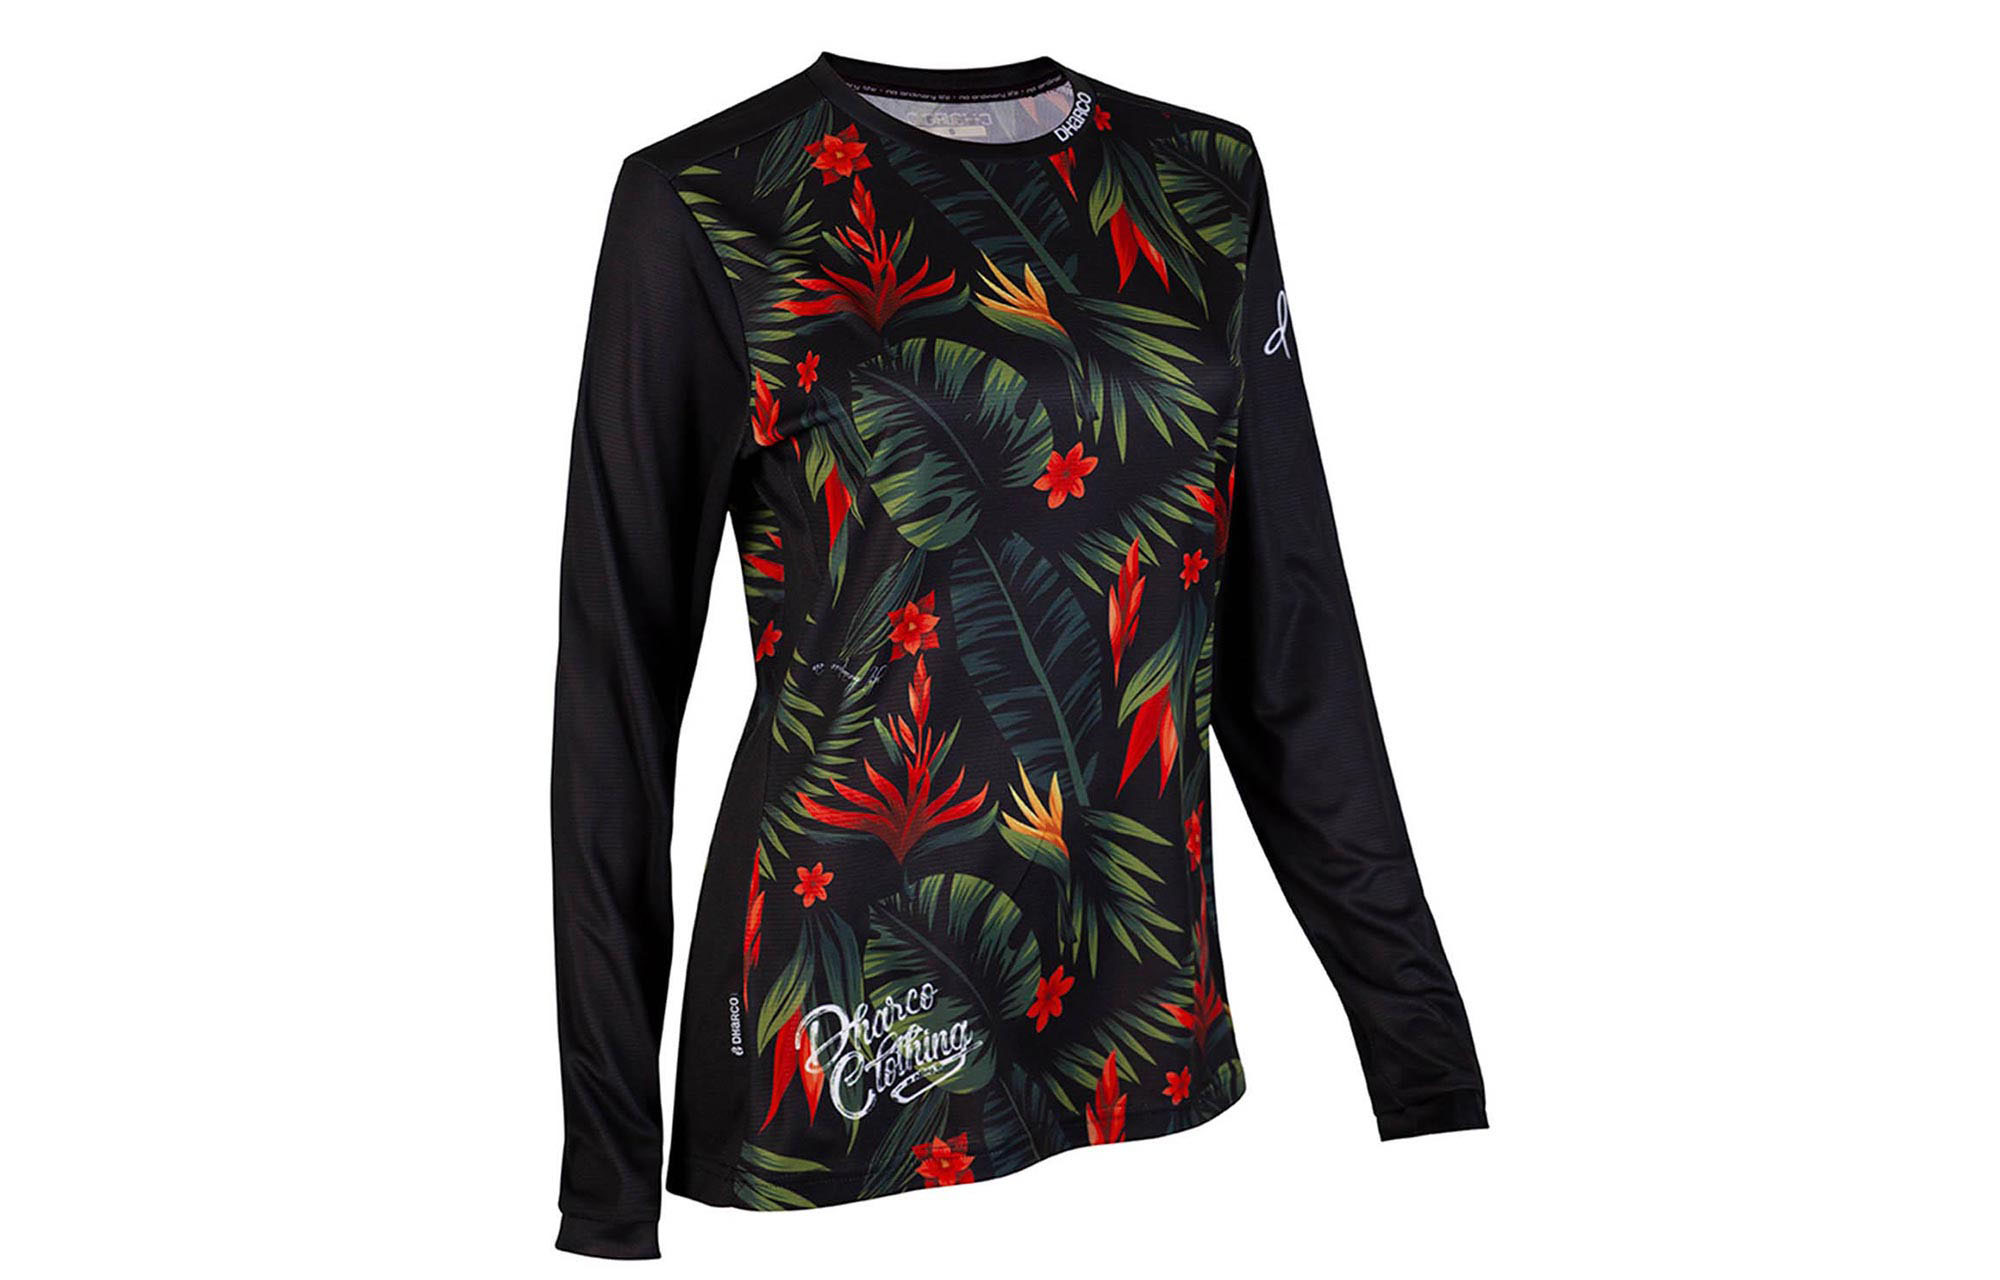 DHARCO WOMEN LONG SLEEVE JERSEY TROPICAL image number 0